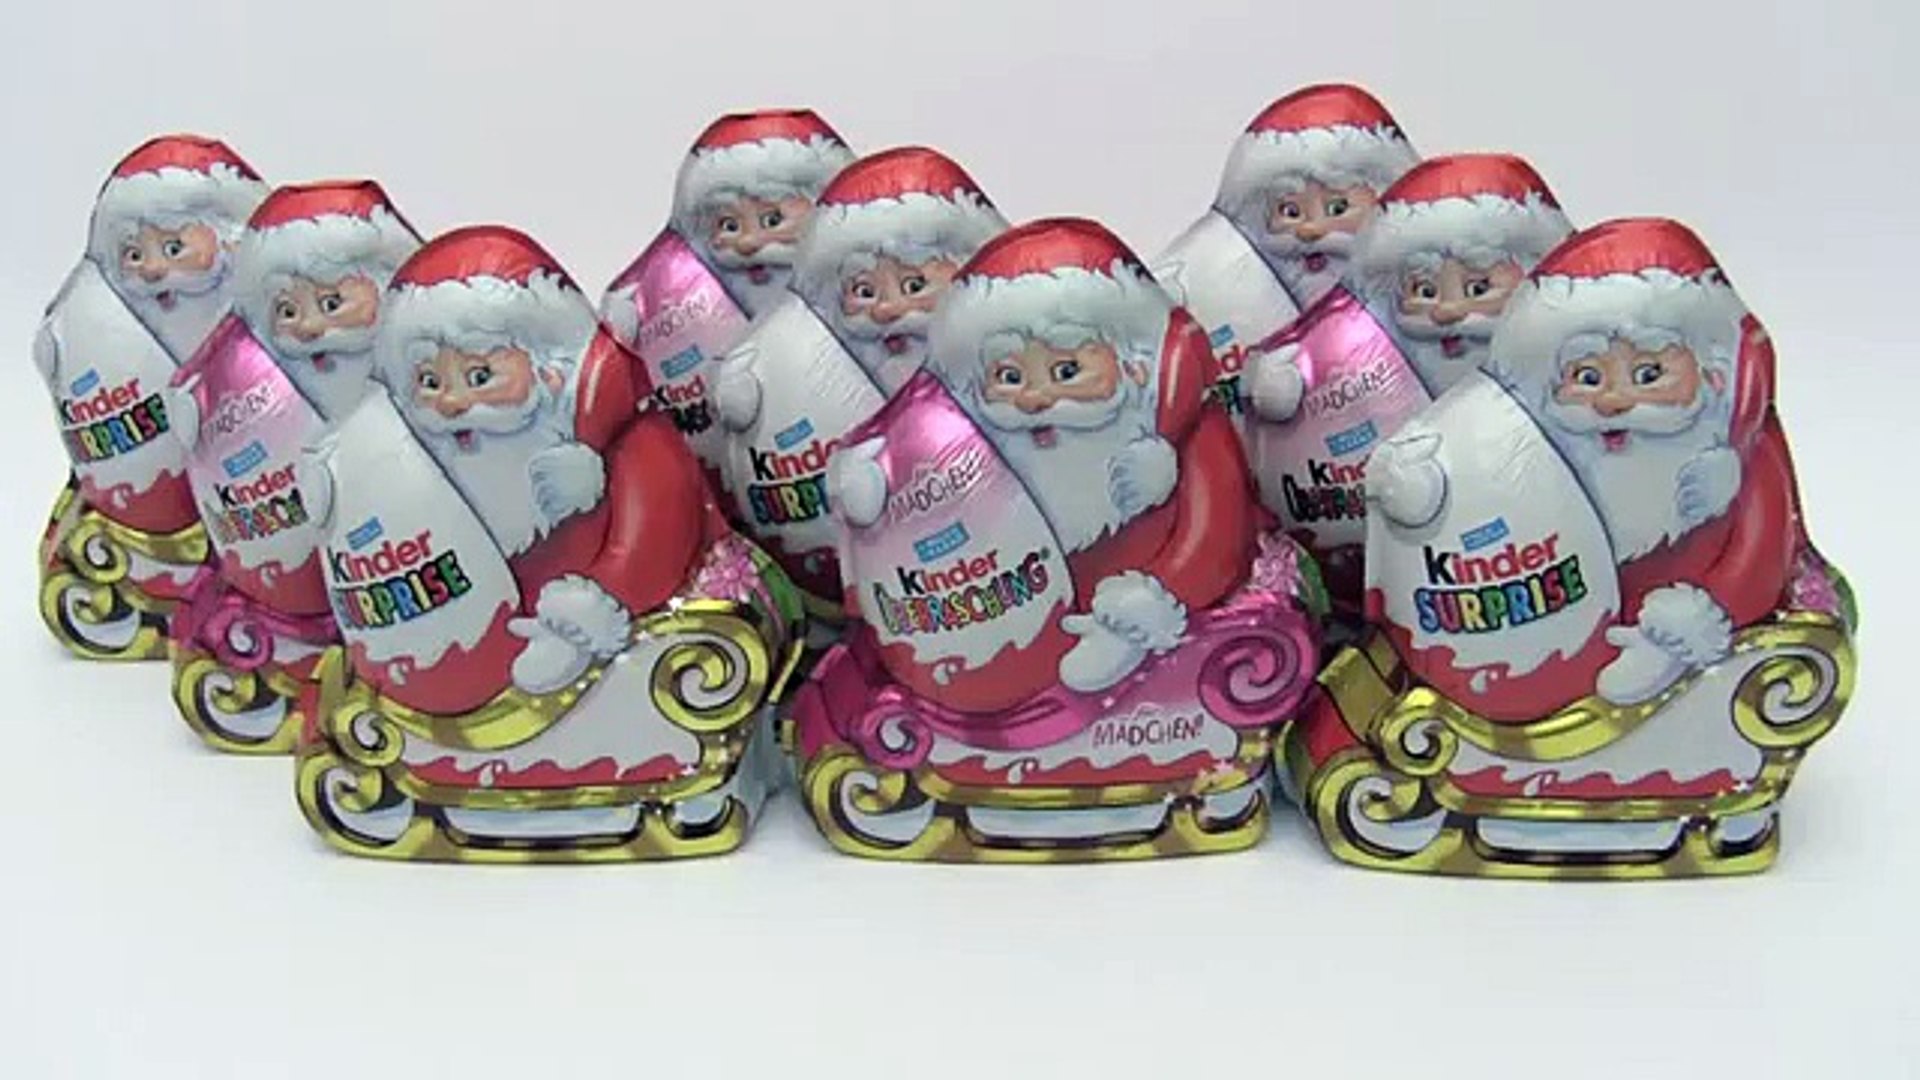 Babbo Natale Kinder.9 Kinder Surprise Santa Claus By Surprise Eggs Toys Show Unboxing Video Dailymotion